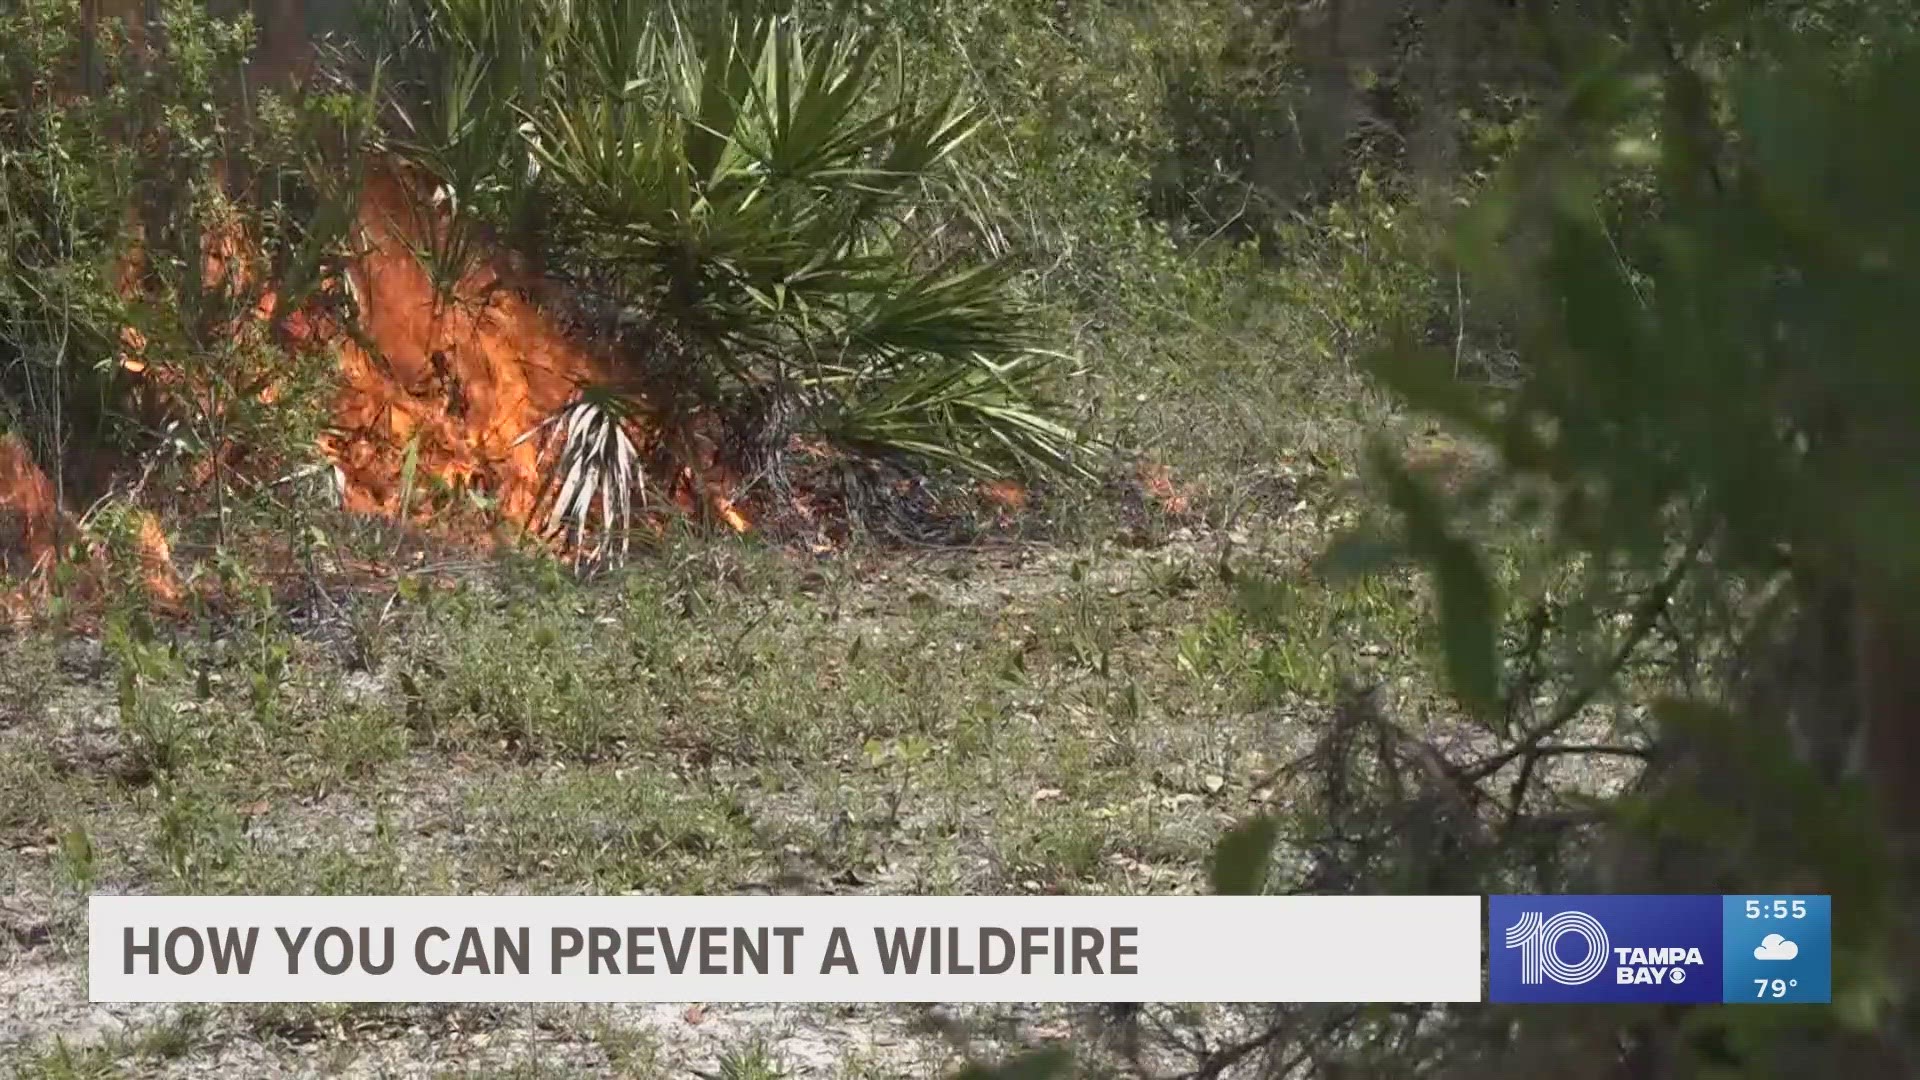 Despite a wet winter, the Florida Forestry Service says the state has already seen more than 500 wildfires since the beginning of the year.